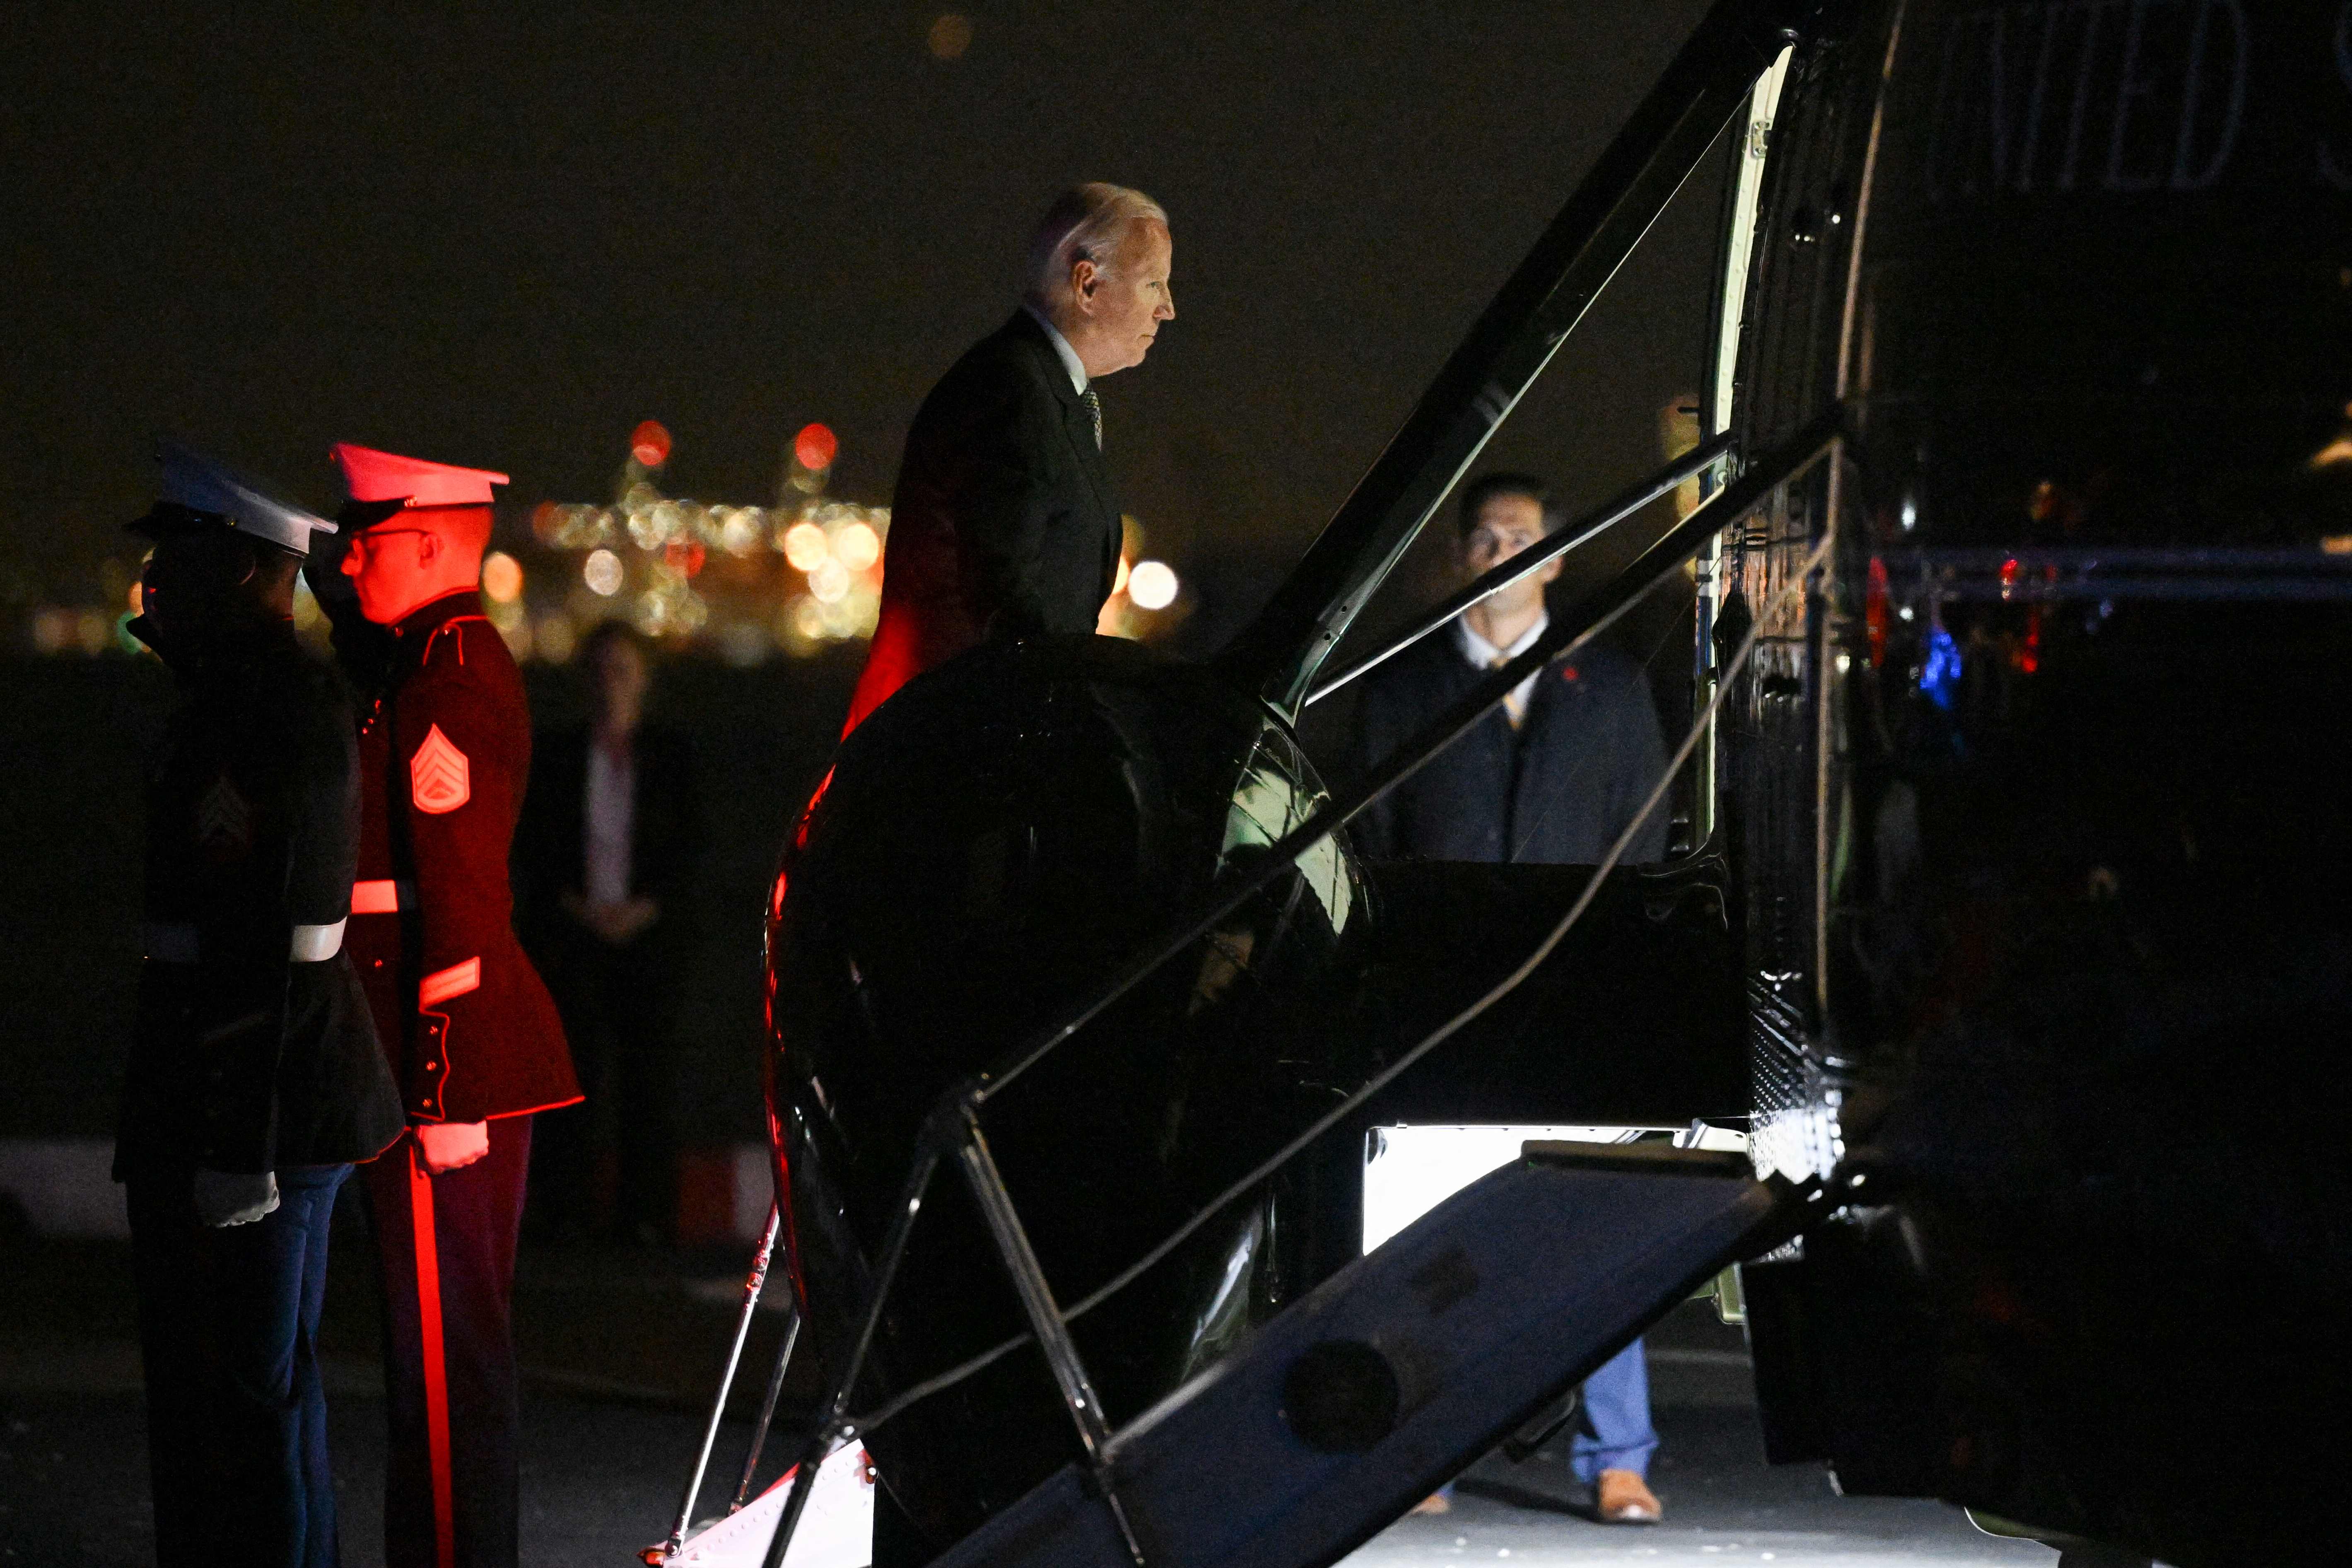 US President Joe Biden boards Marine One before departing from the Wall Street landing zone in New York on October 6, 2022